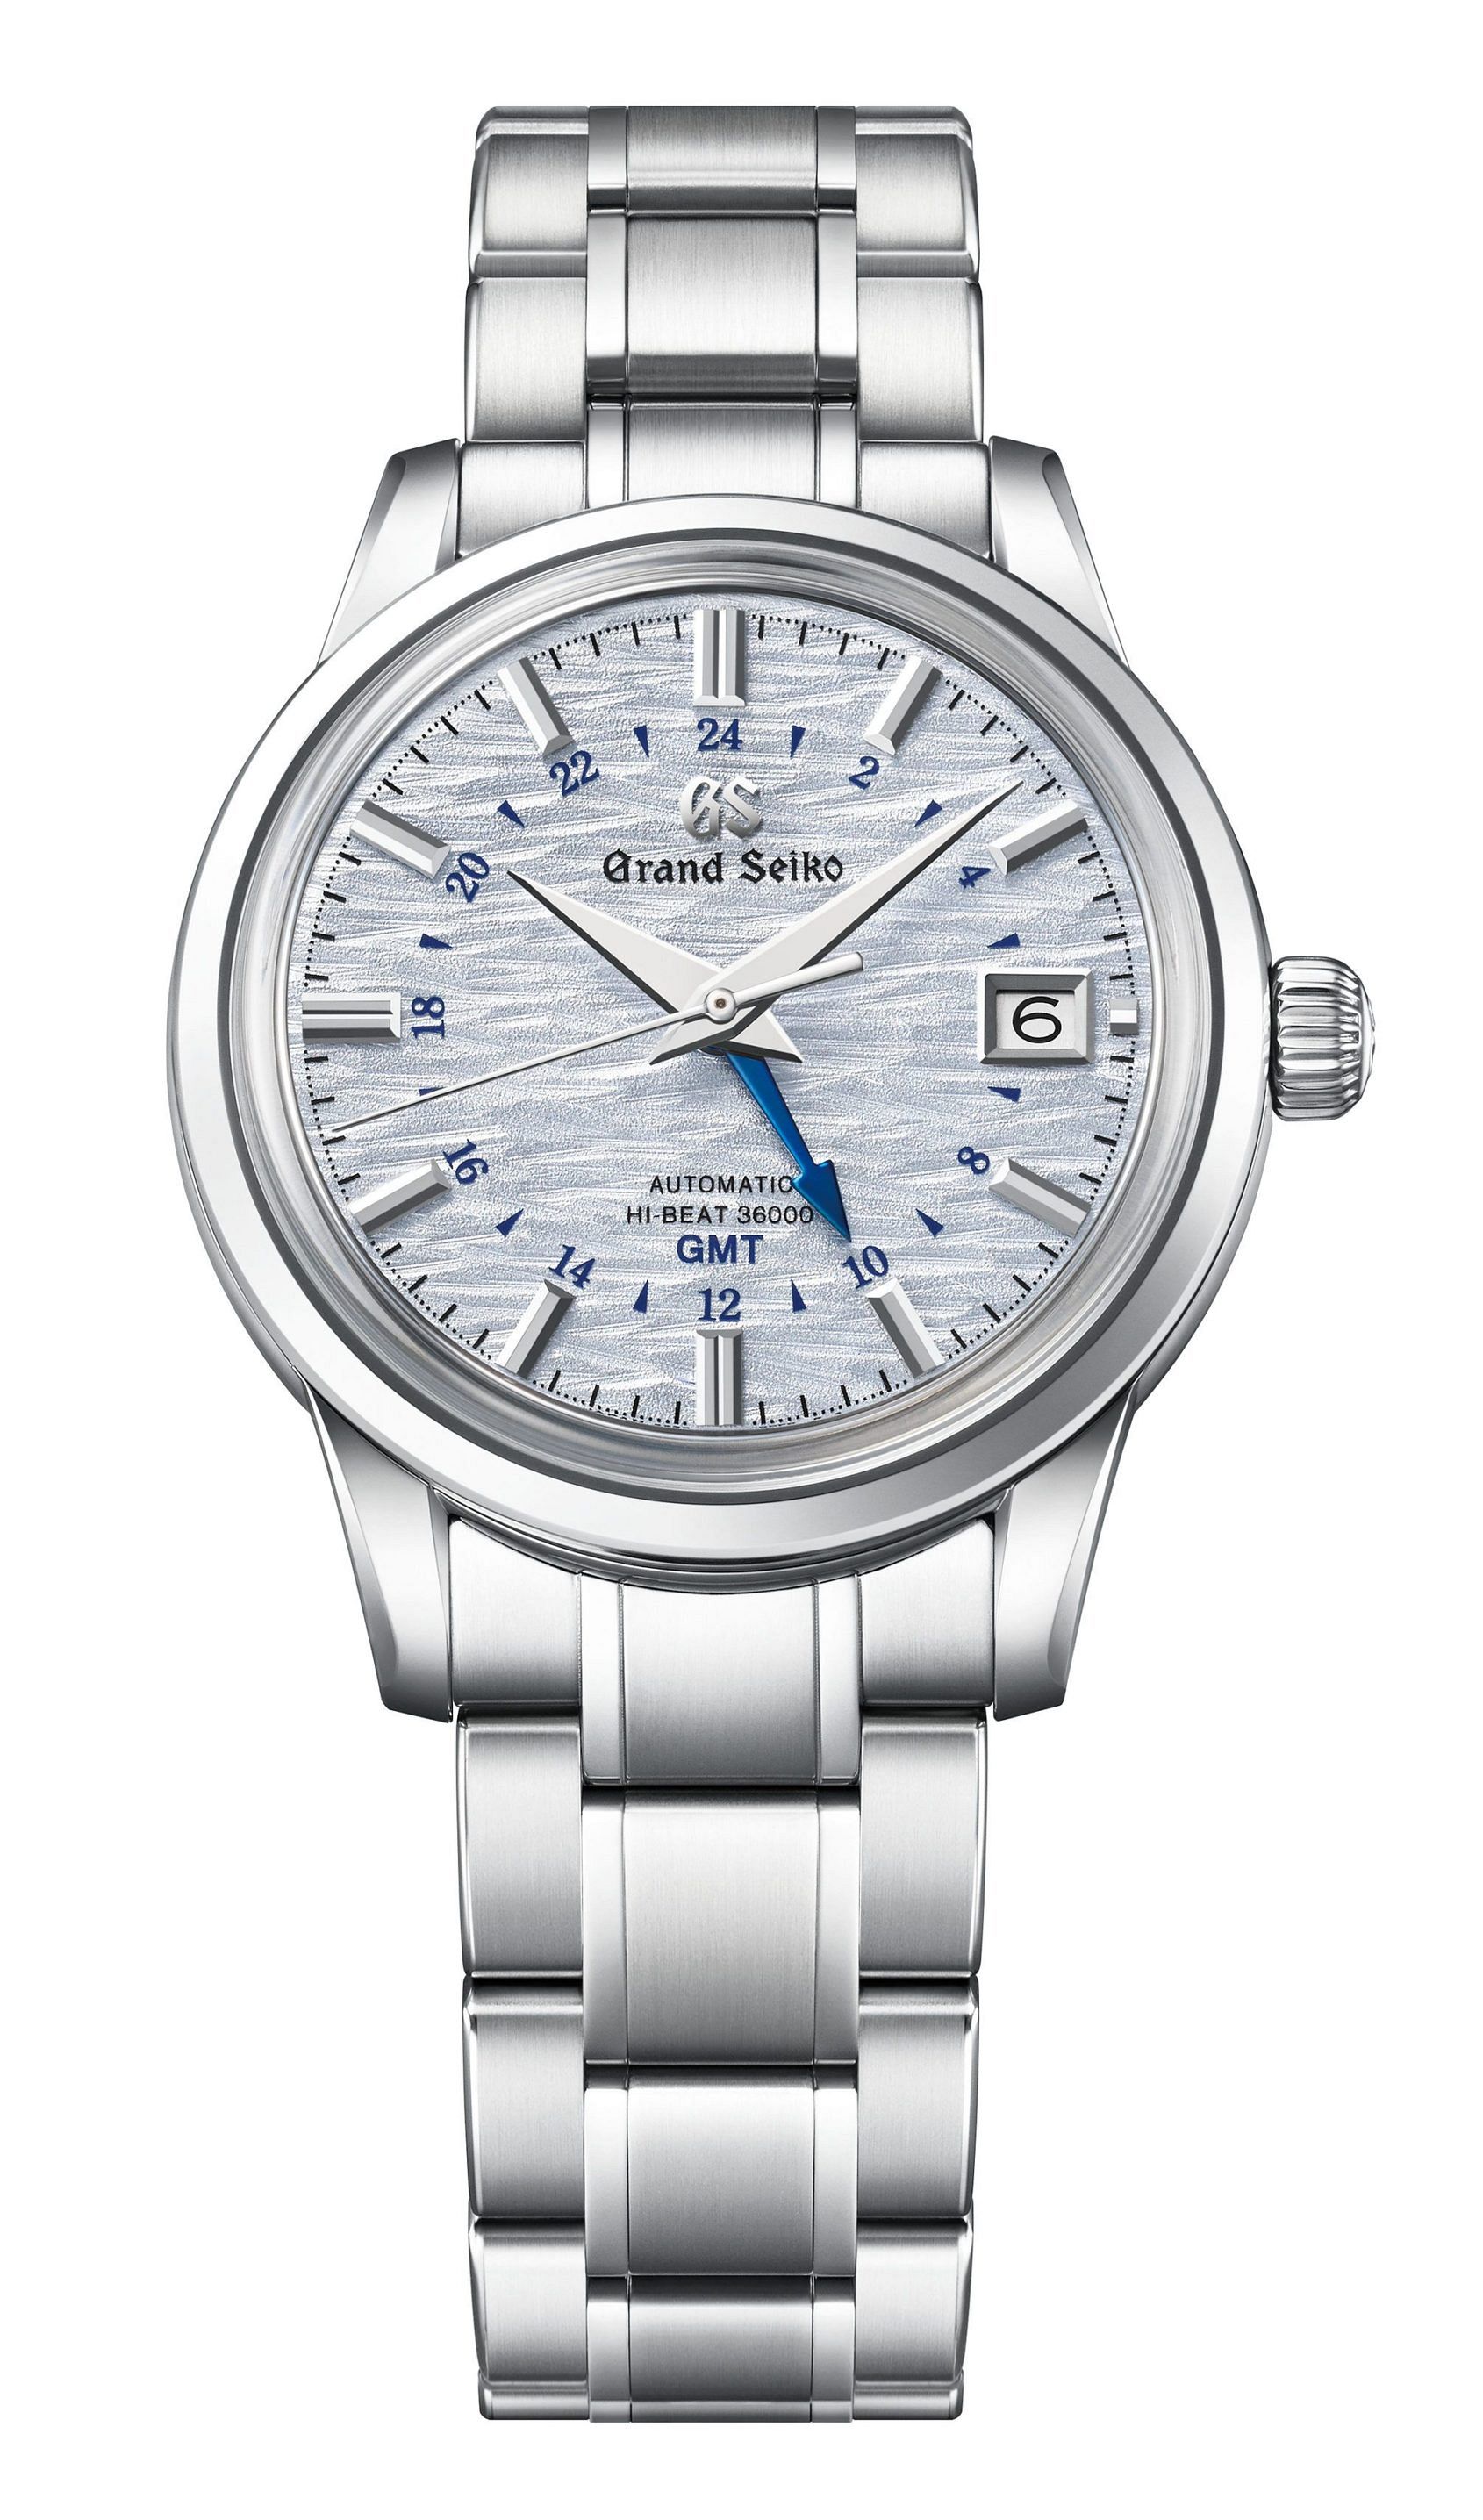 INTRODUCING: The Grand Seiko GMT Seasons Collection